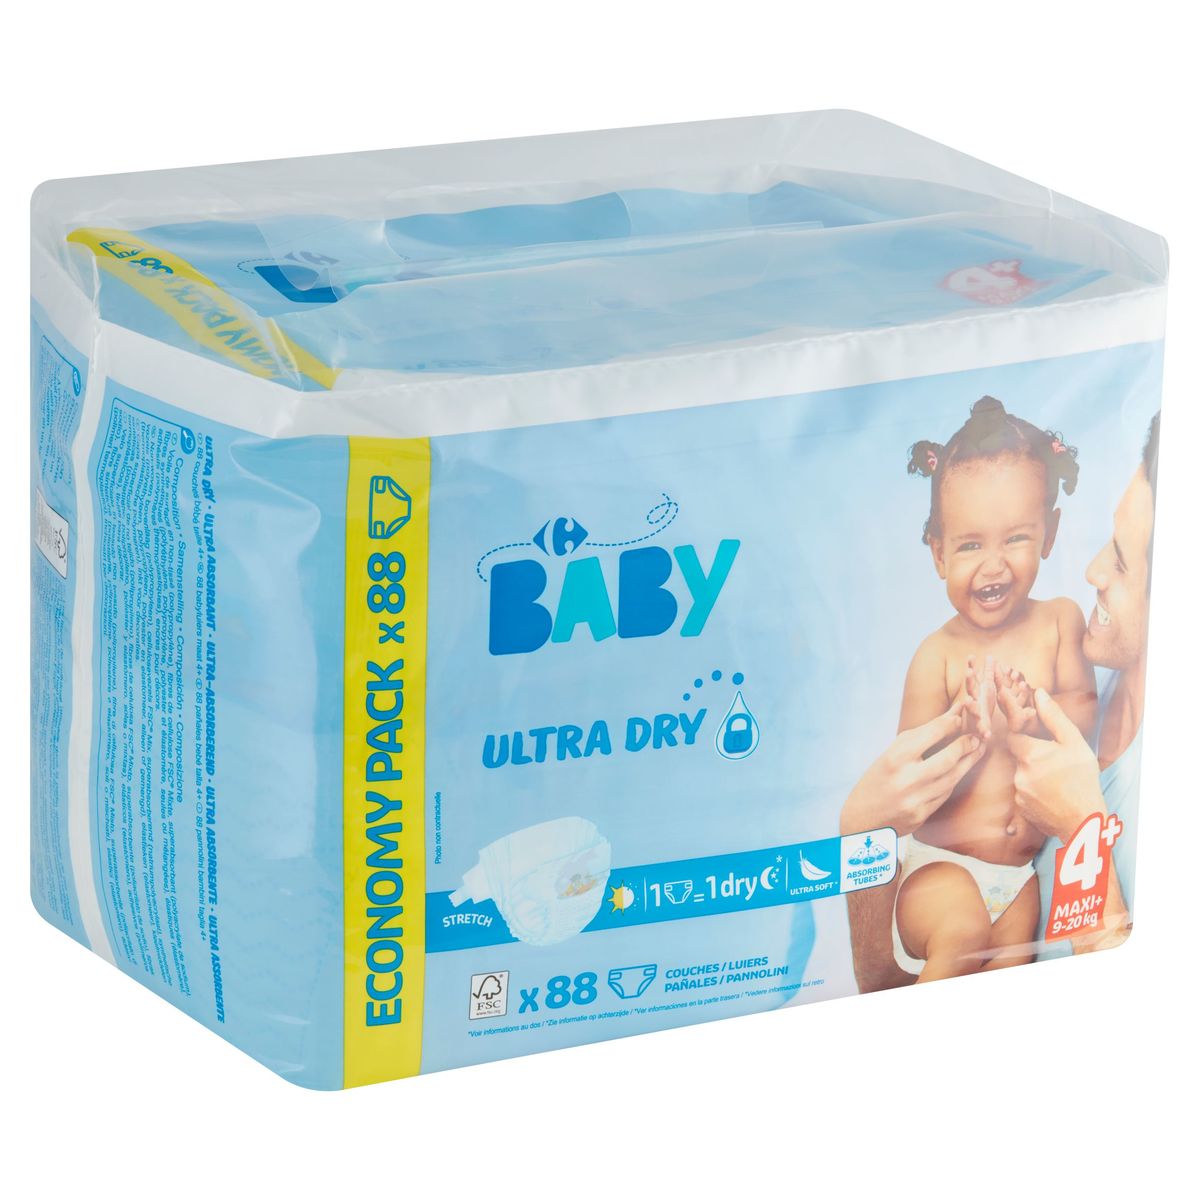 Couches Ultra Dry taille 4 maxi+ : 9-20 kg CARREFOUR BABY